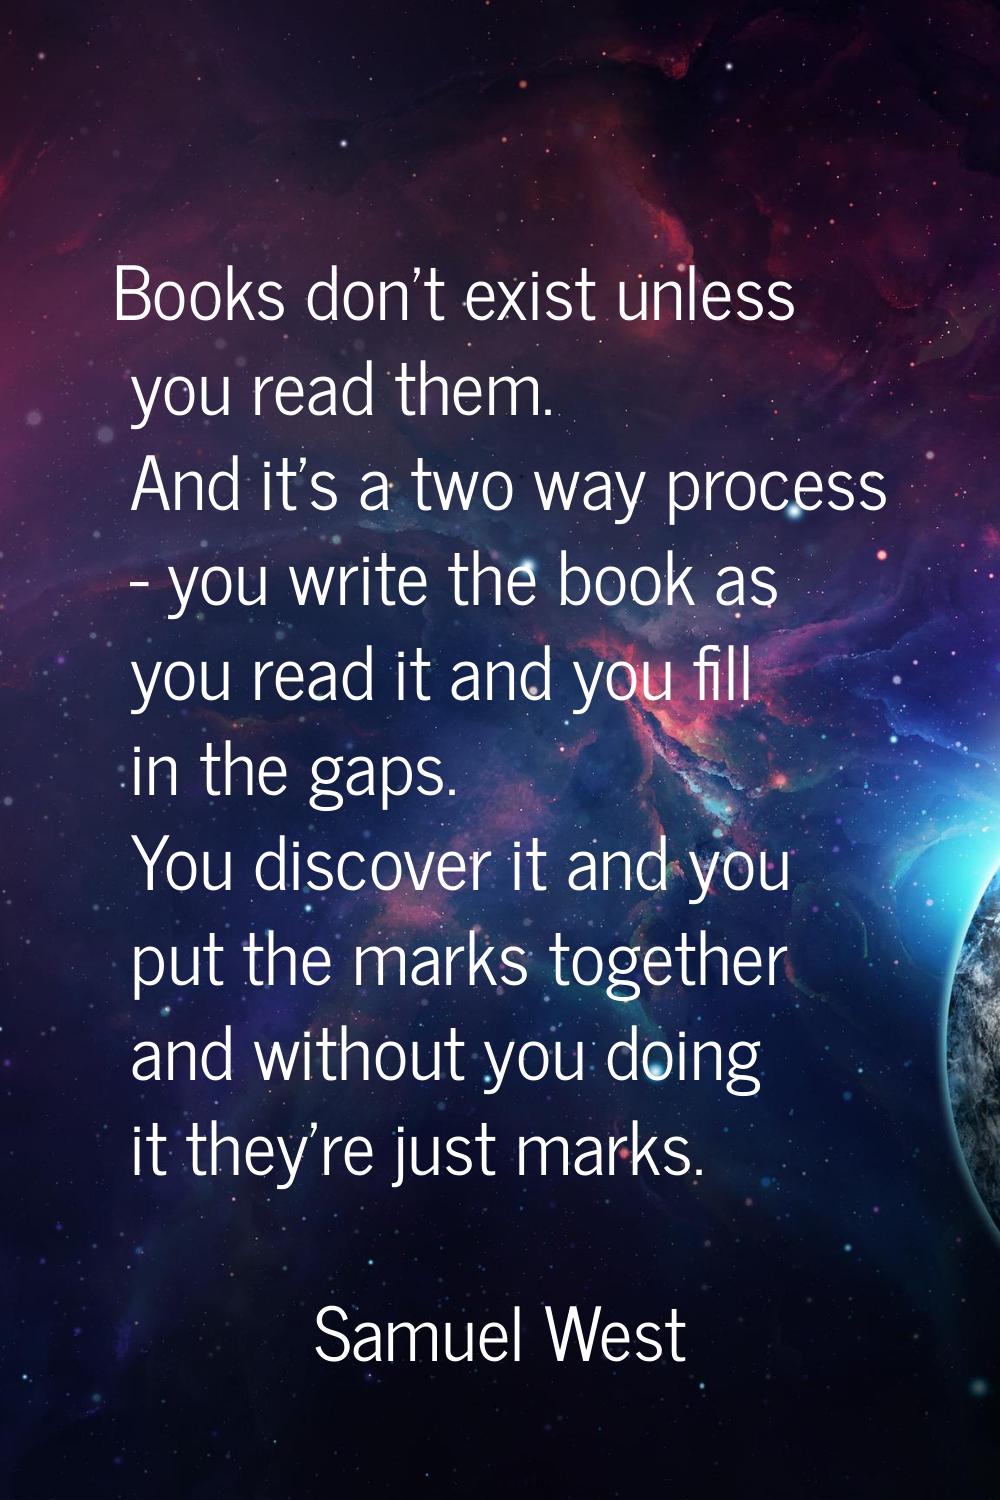 Books don't exist unless you read them. And it's a two way process - you write the book as you read